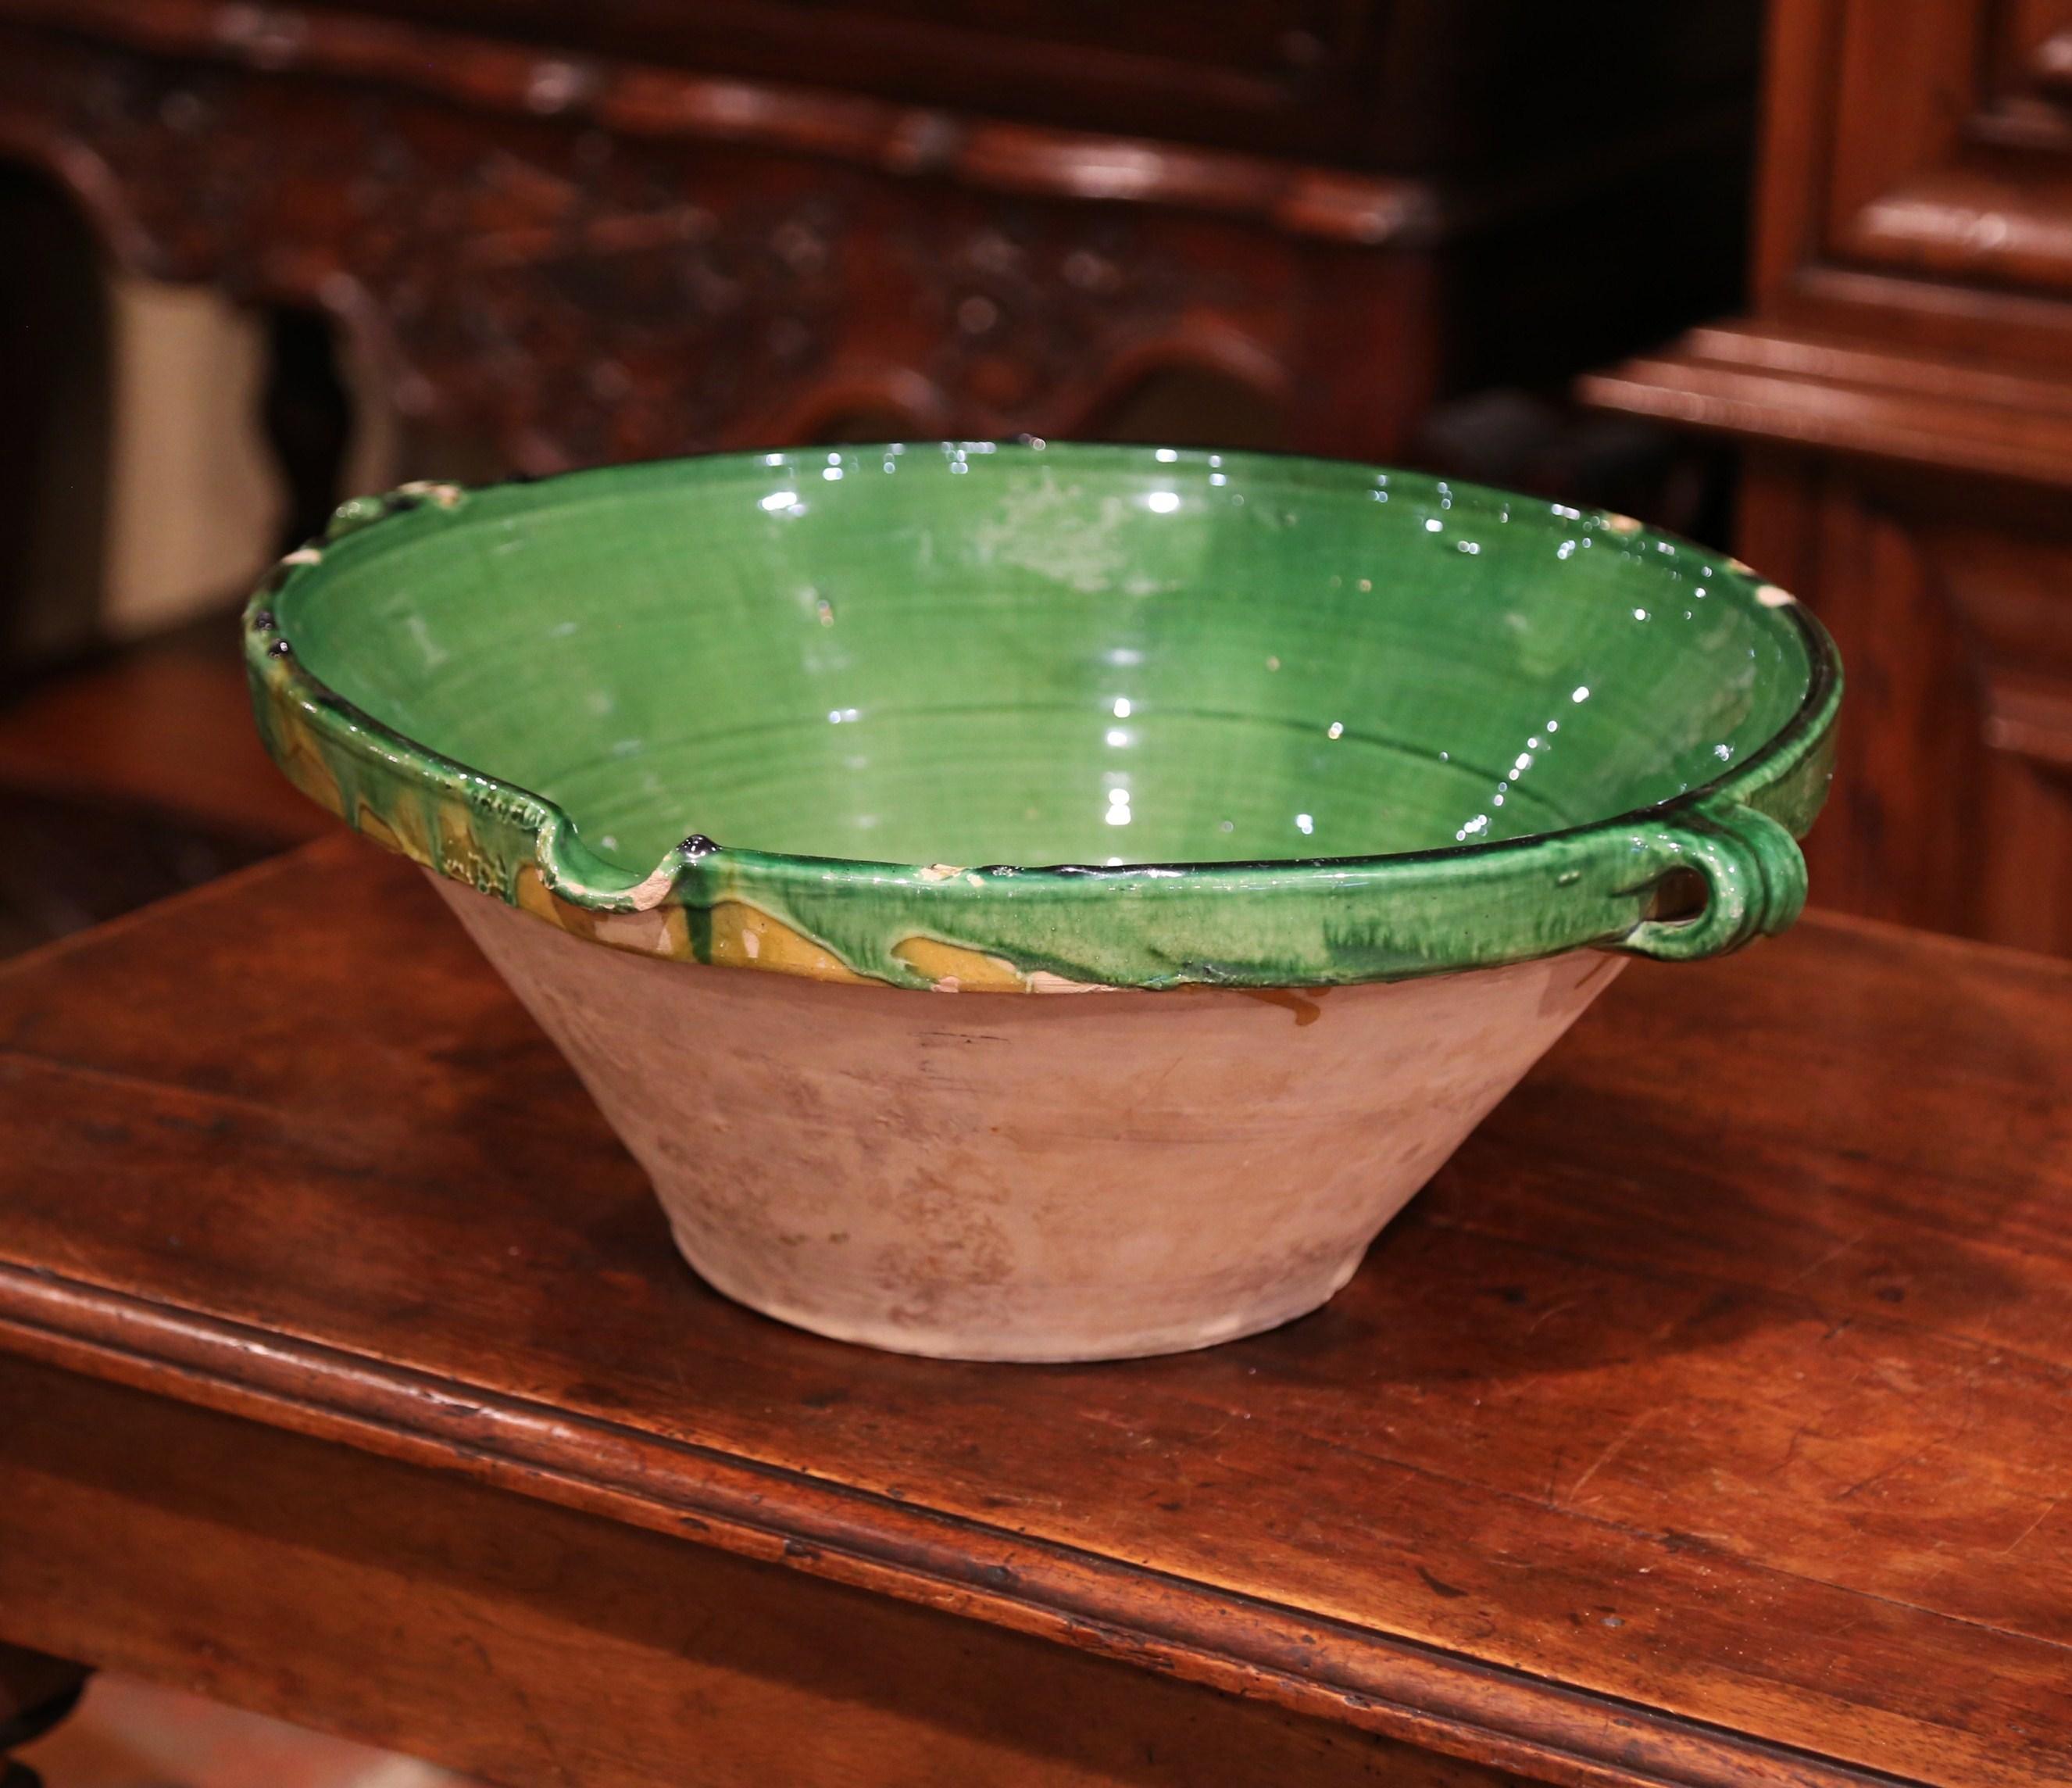 This elegant antique Tian (Provencal term for bowl) was crafted in Provence, France, circa 1870; the round handmade terracotta bowl features two small handles, a server beak, and has a subtle green glaze on the inside with natural earthenware finish